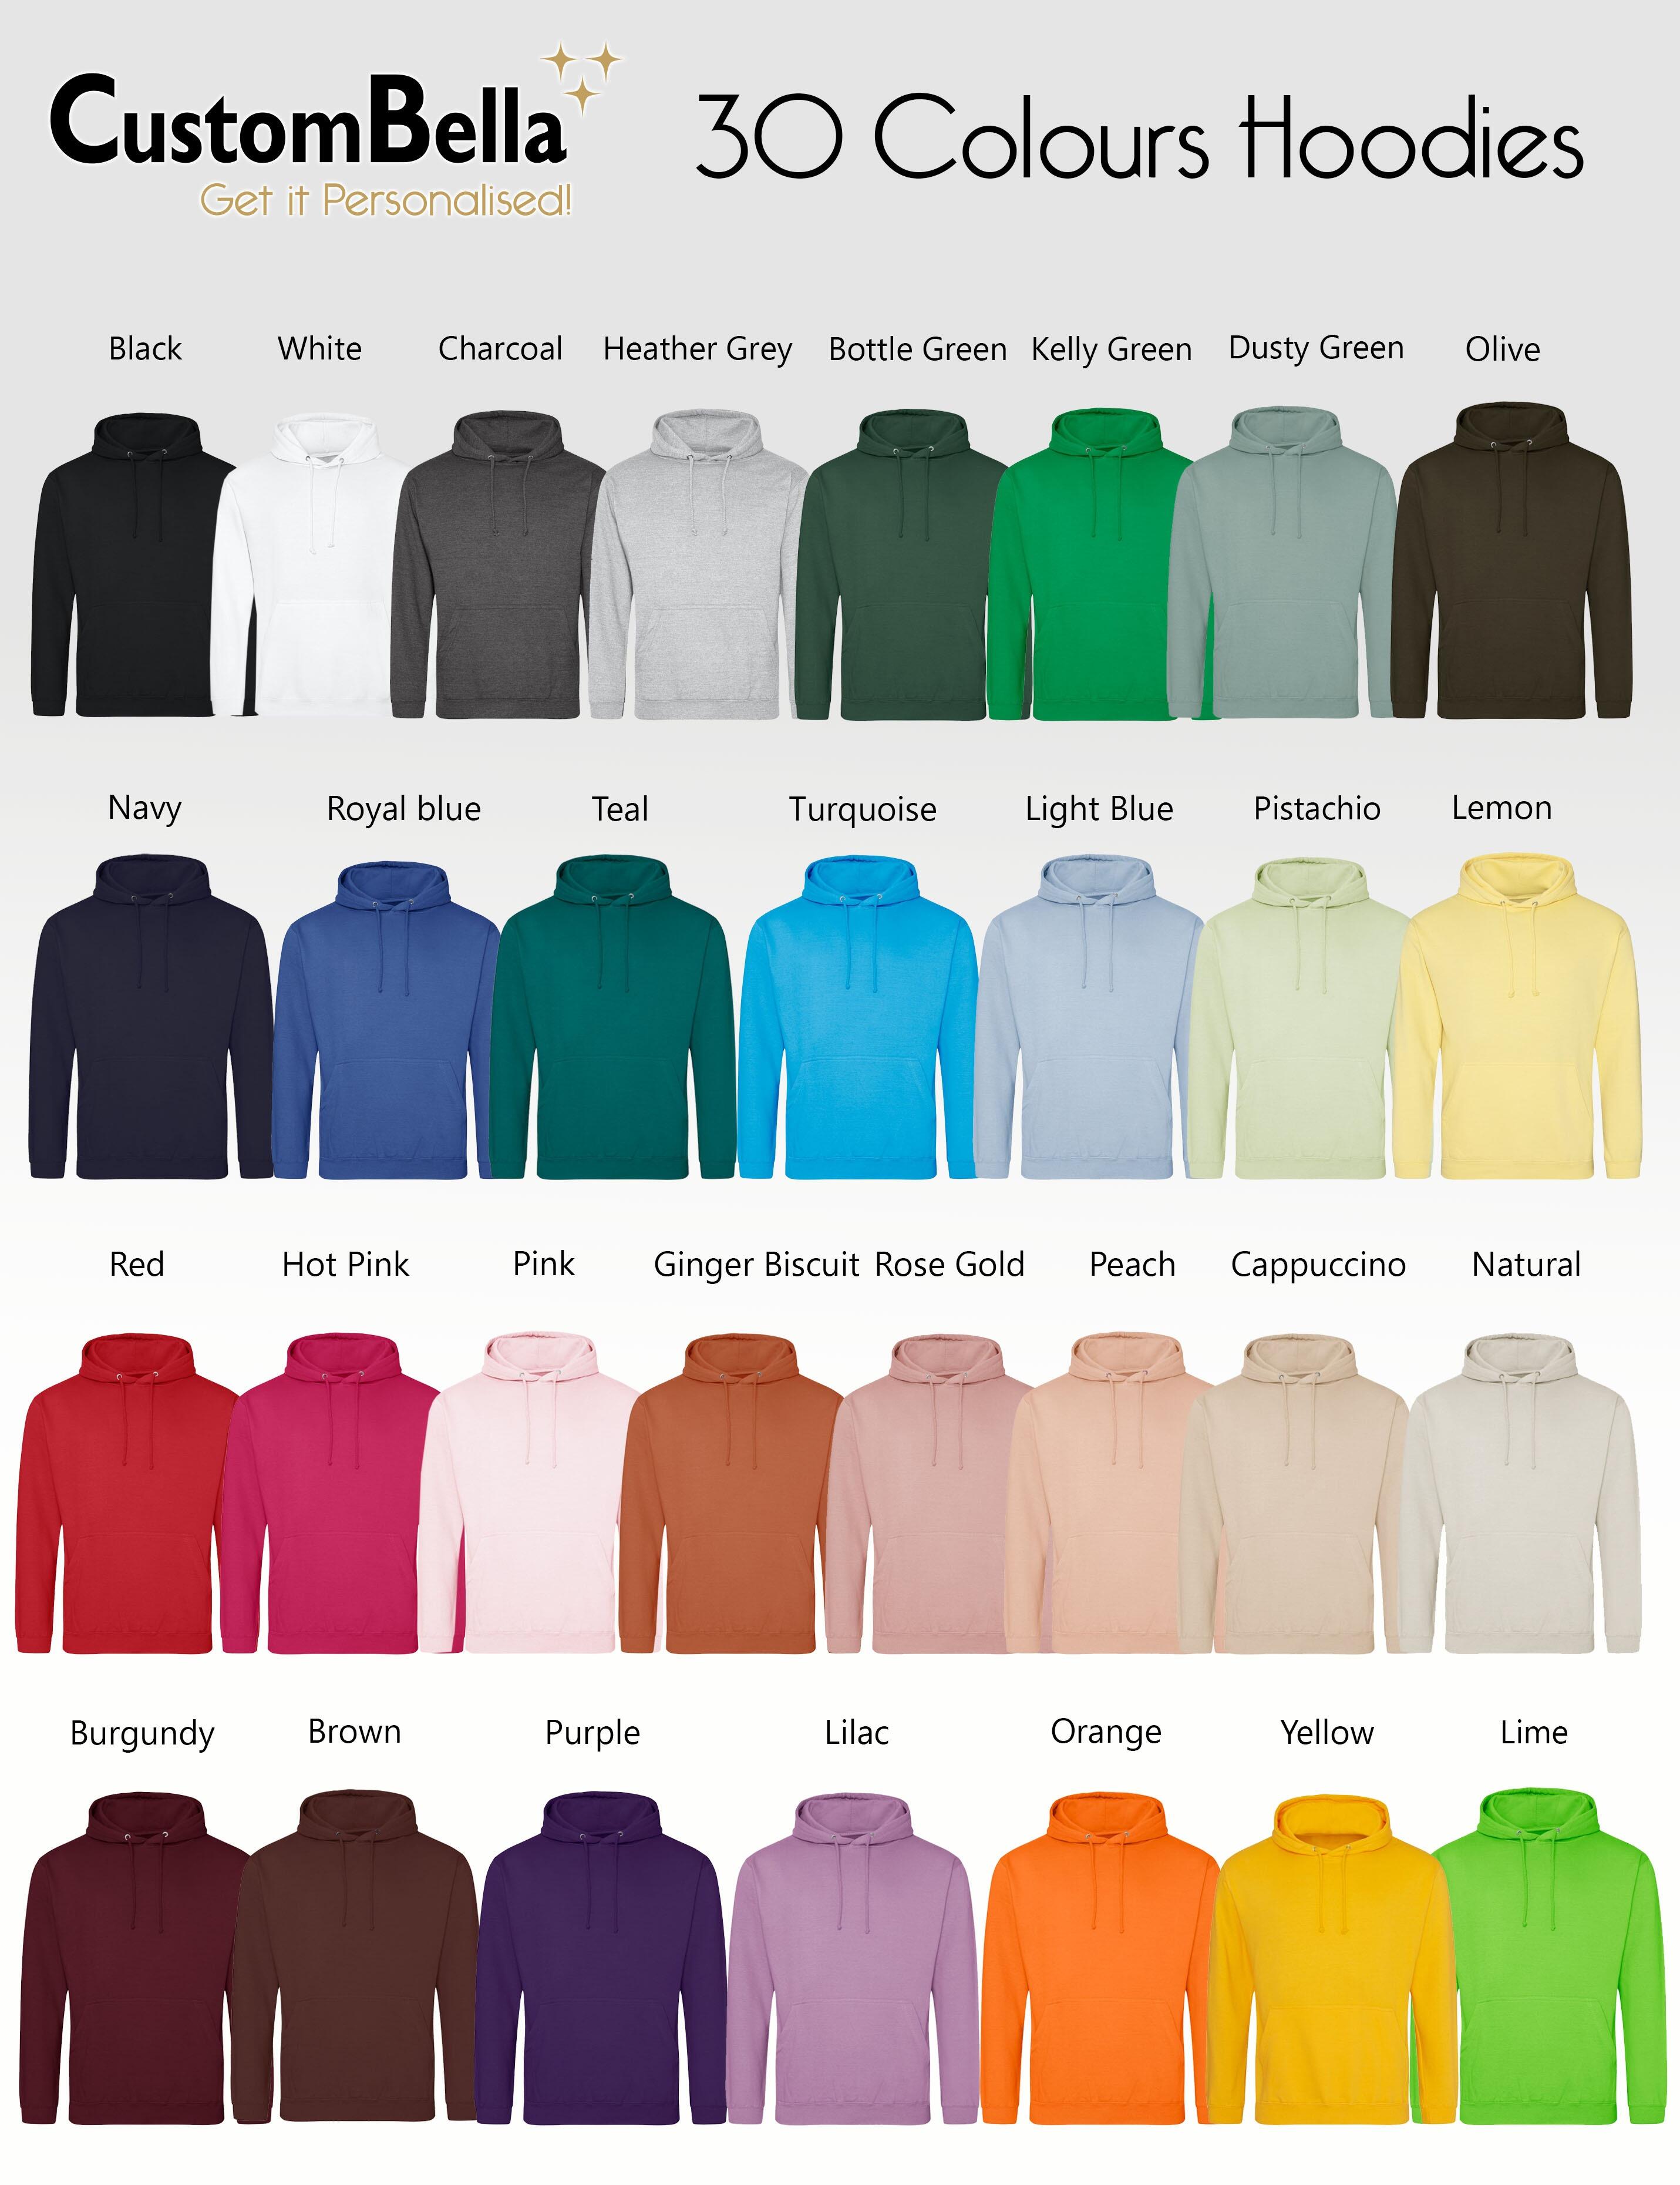 Full colour printed hoodie in 30 colours